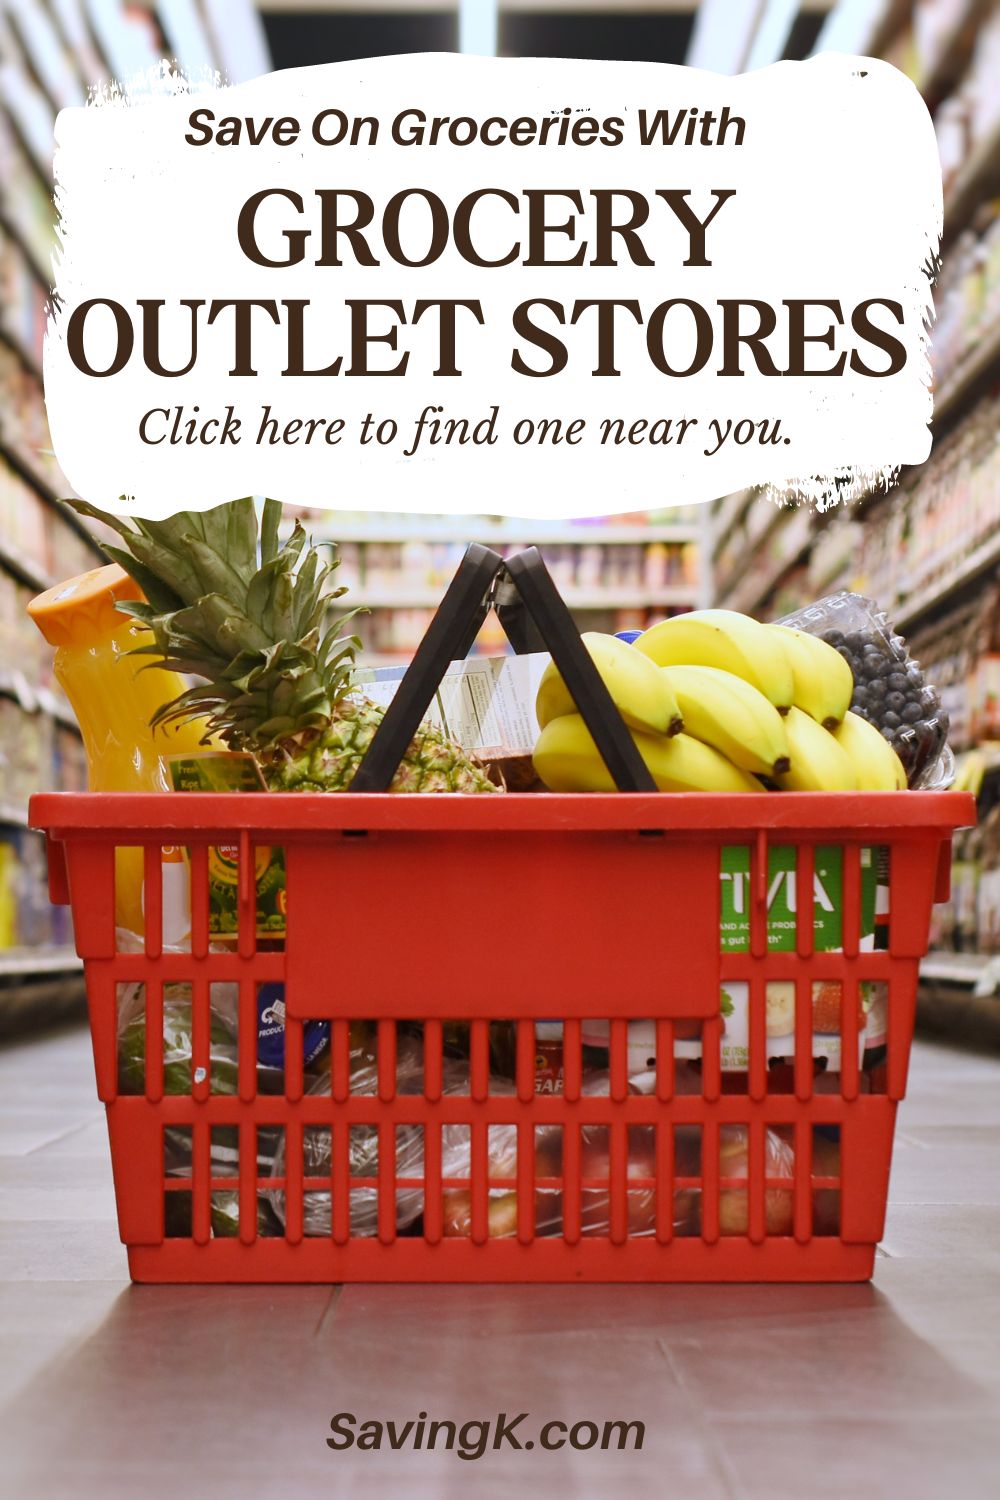 Save On Groceries With Grocery Outlet Stores